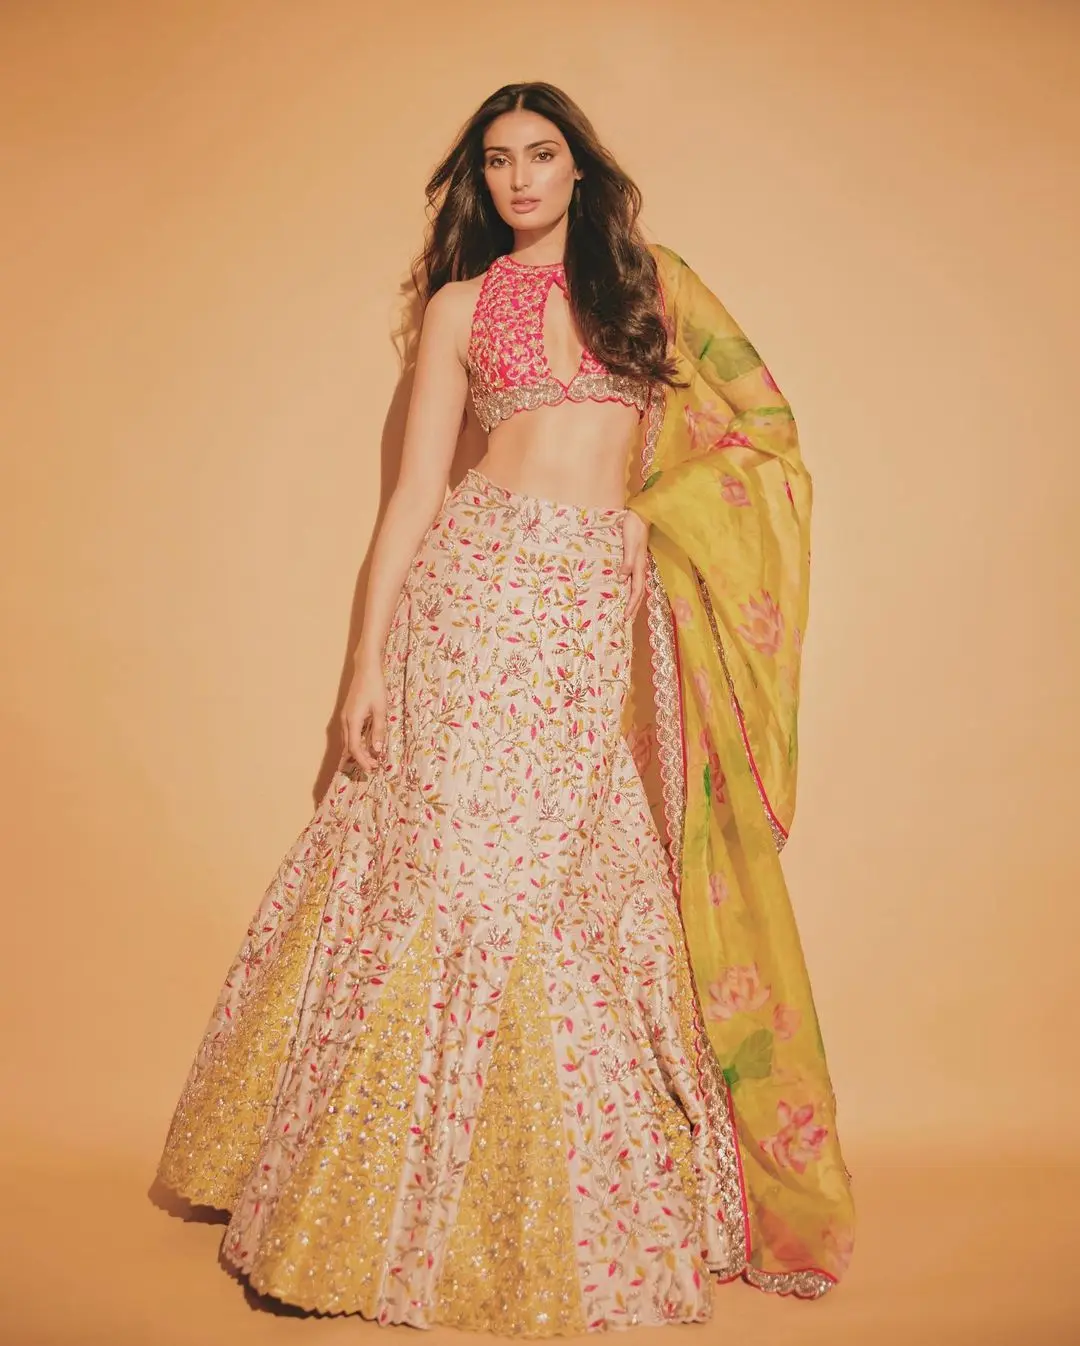 From Sexy Pantsuits To Perfect Sangeet Lehenga, Athiya Shetty's Dolled Up  Looks Are Fashion Goals